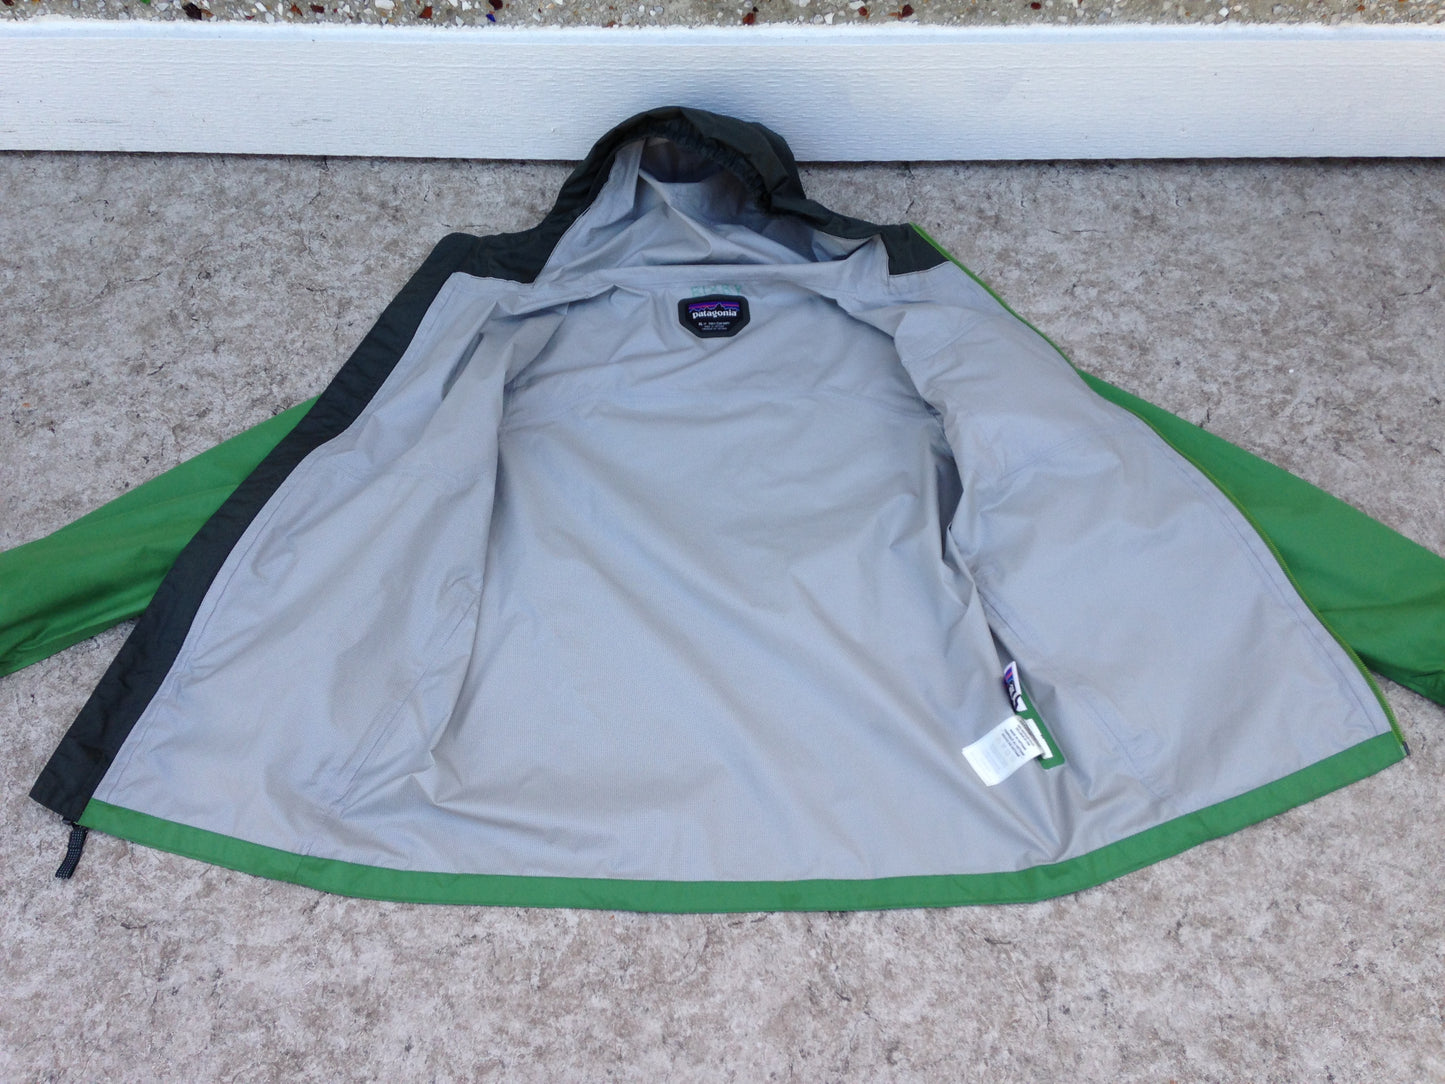 Rain Coat Child Size 14 Patagonia Waterproof Sealed Zippers Green Excellent